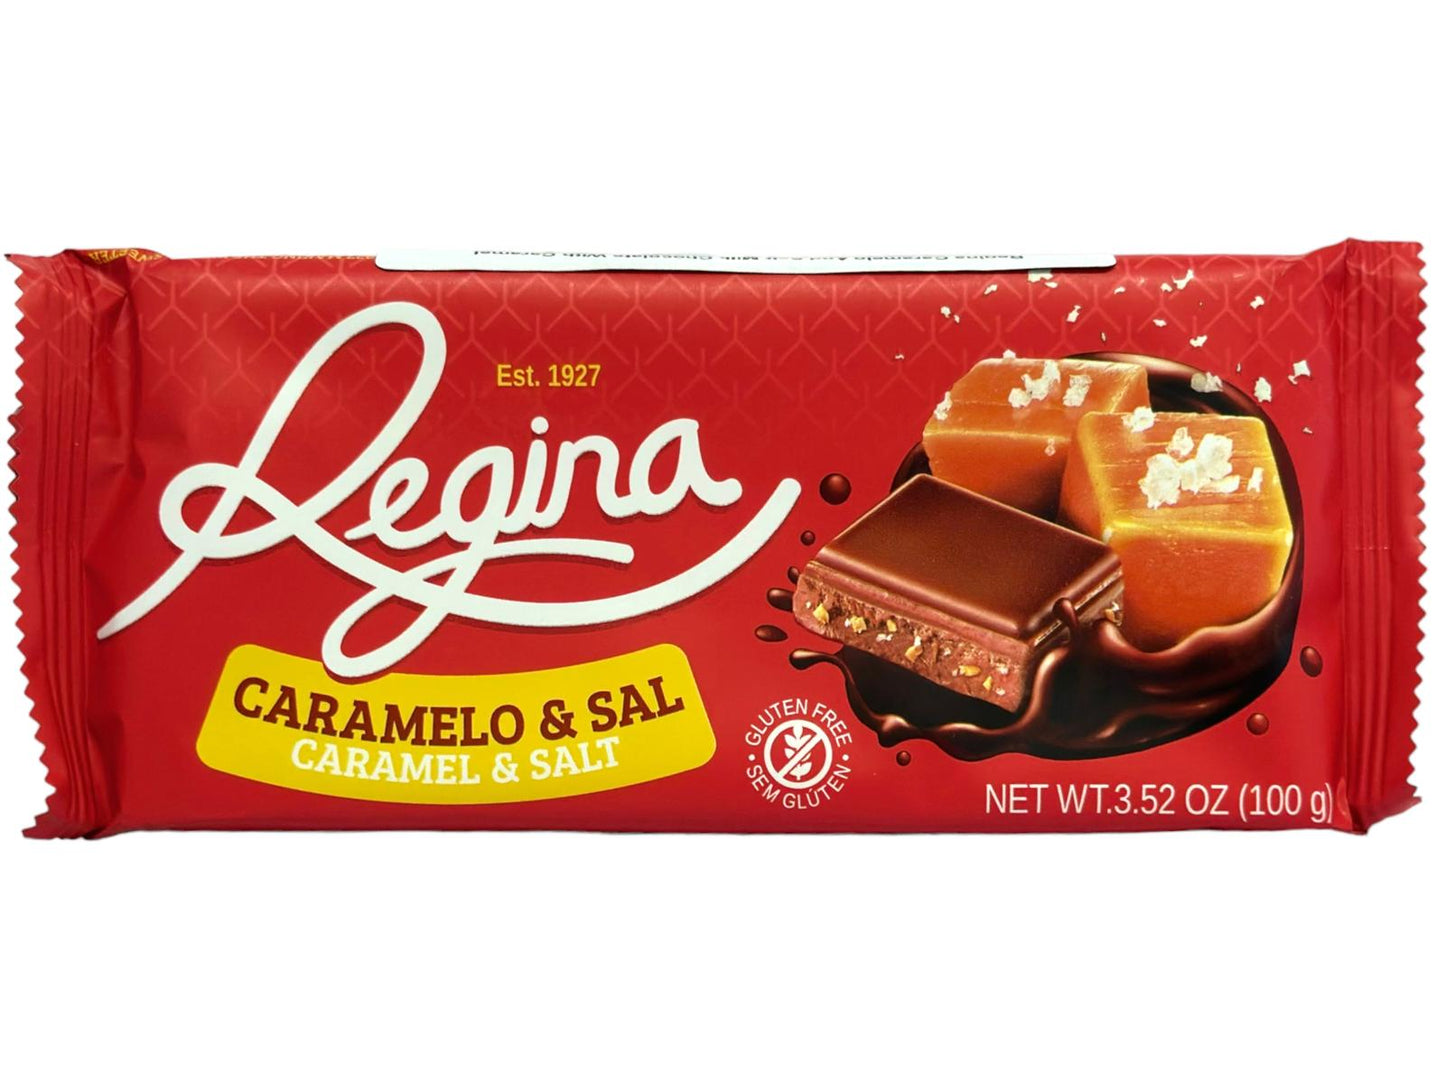 Regina Caramelo and Sal Portuguese Milk Chocolate with Salted Caramel 100g - 6 pack 600g total